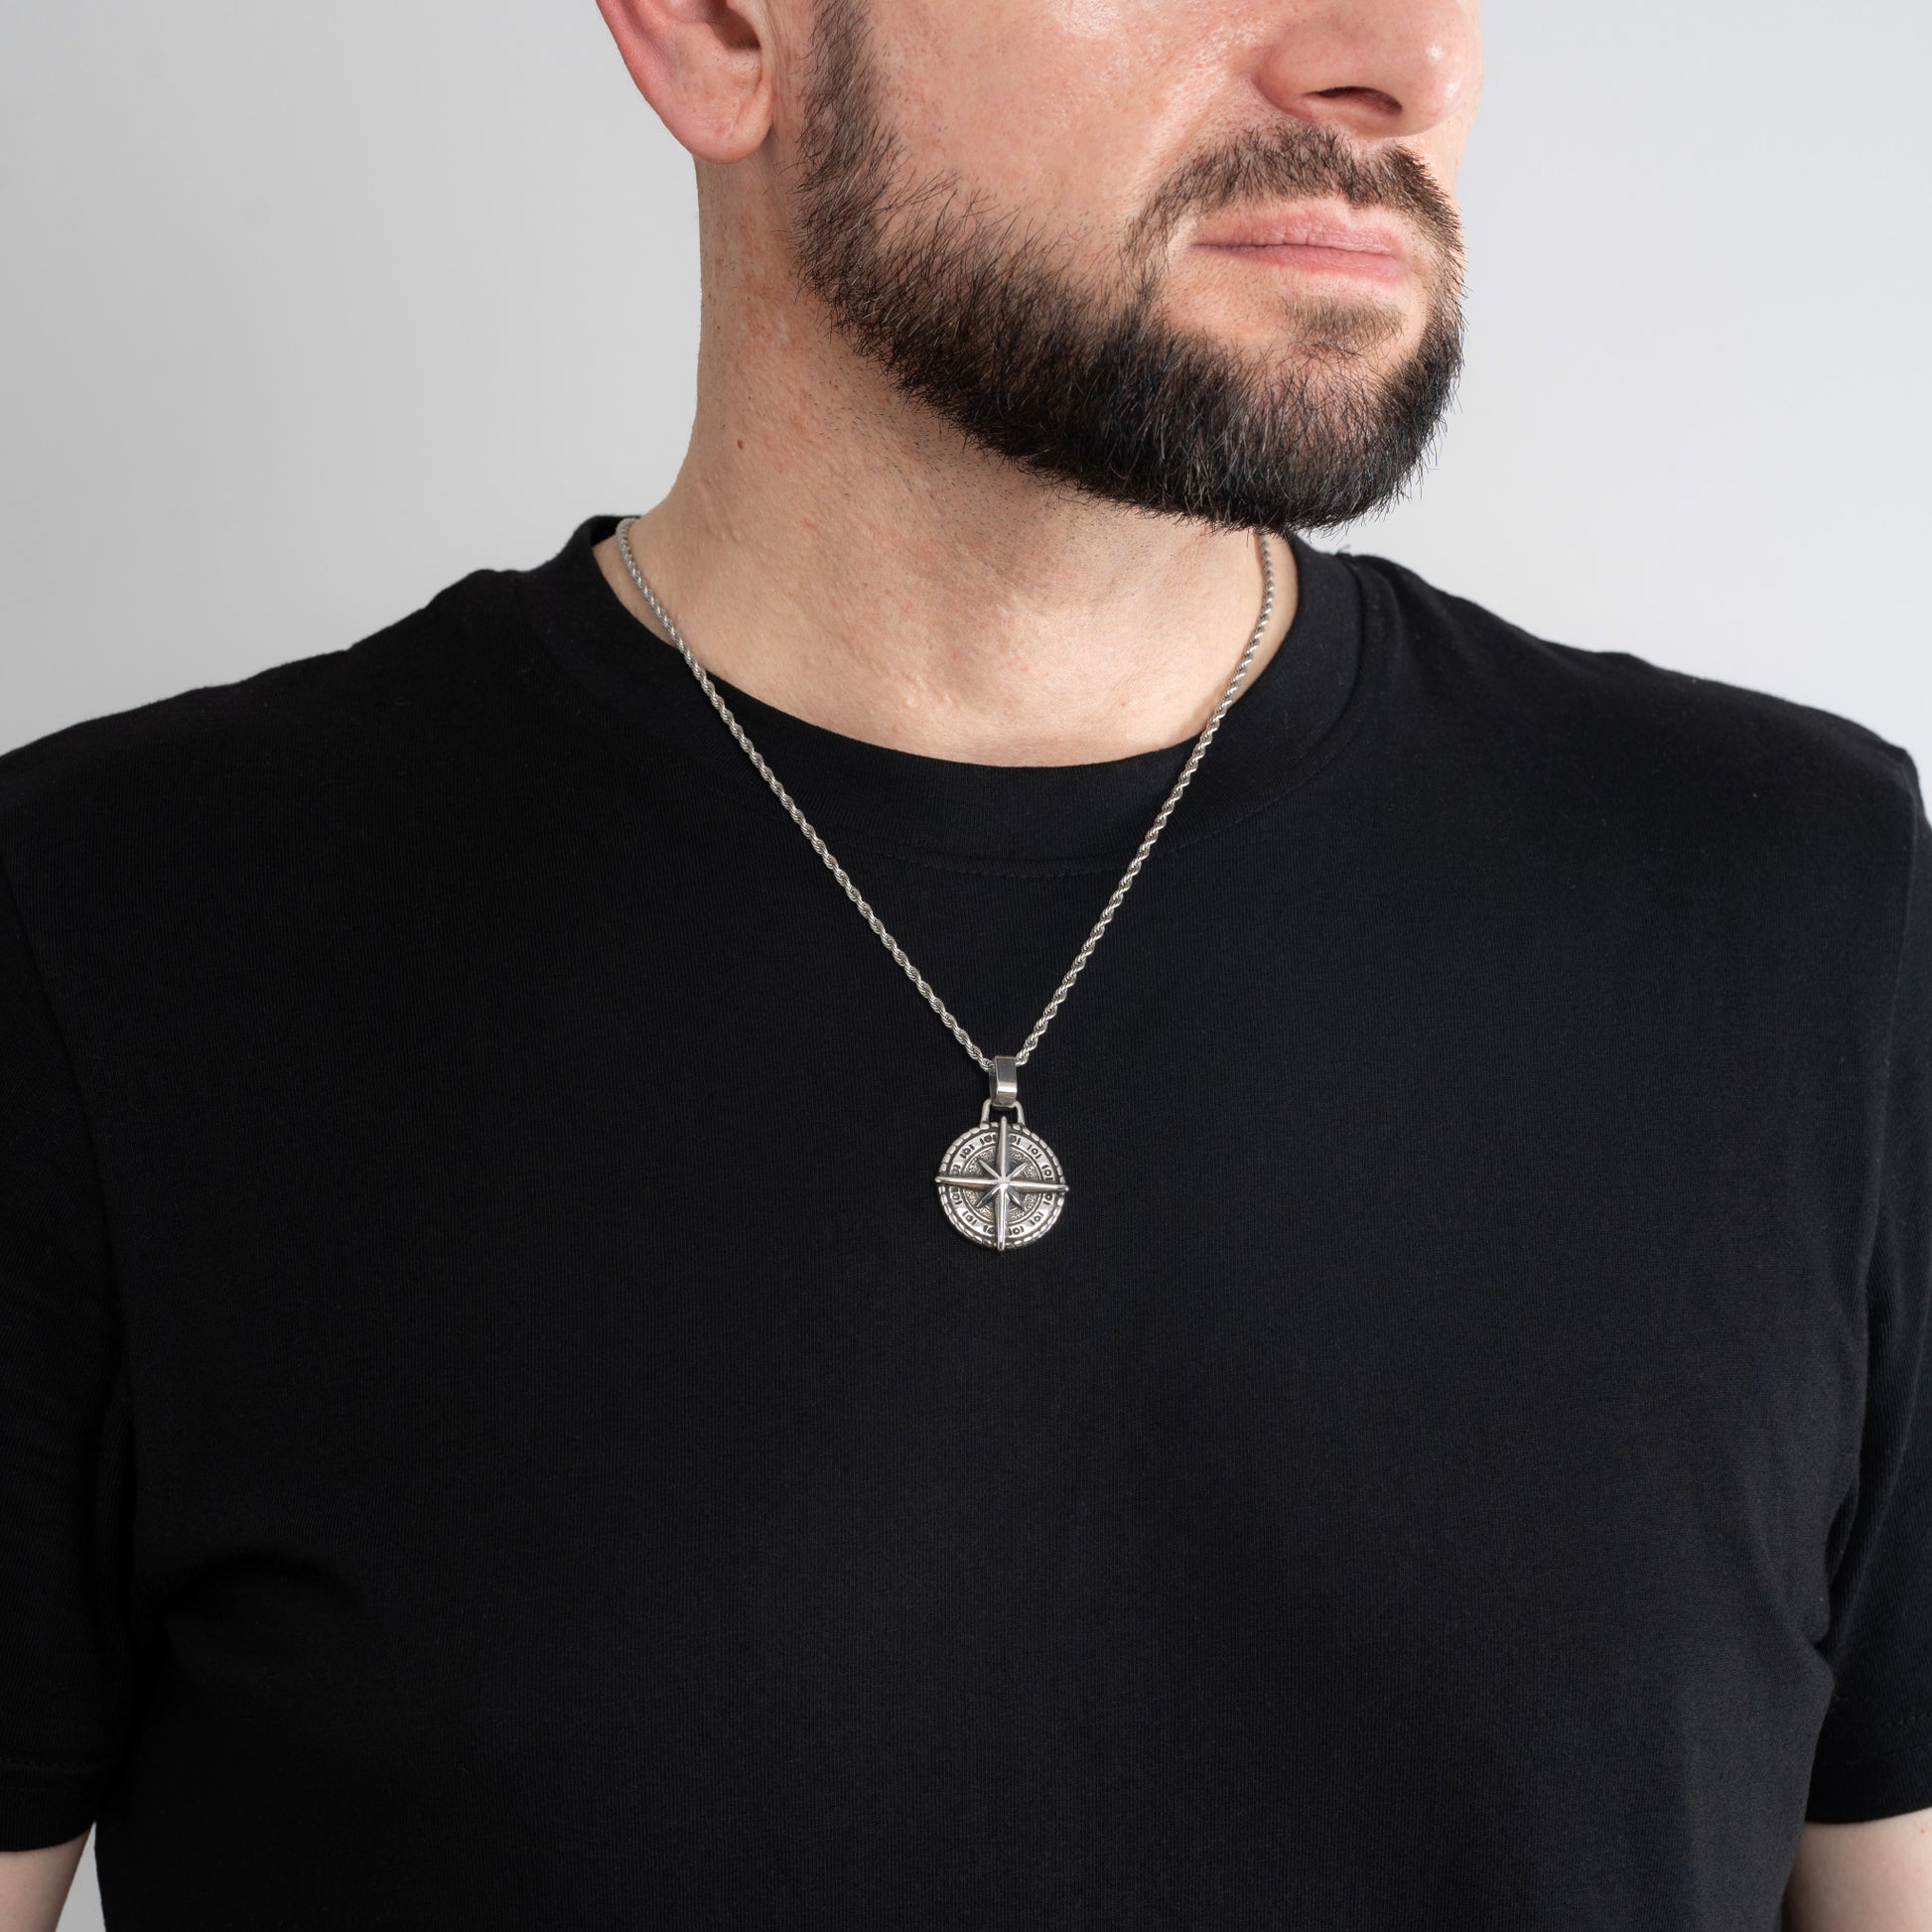 A male model in a black t-shirt wearing a Compass North Star Silver Pendant with a Silver Rope chain 22 inches.